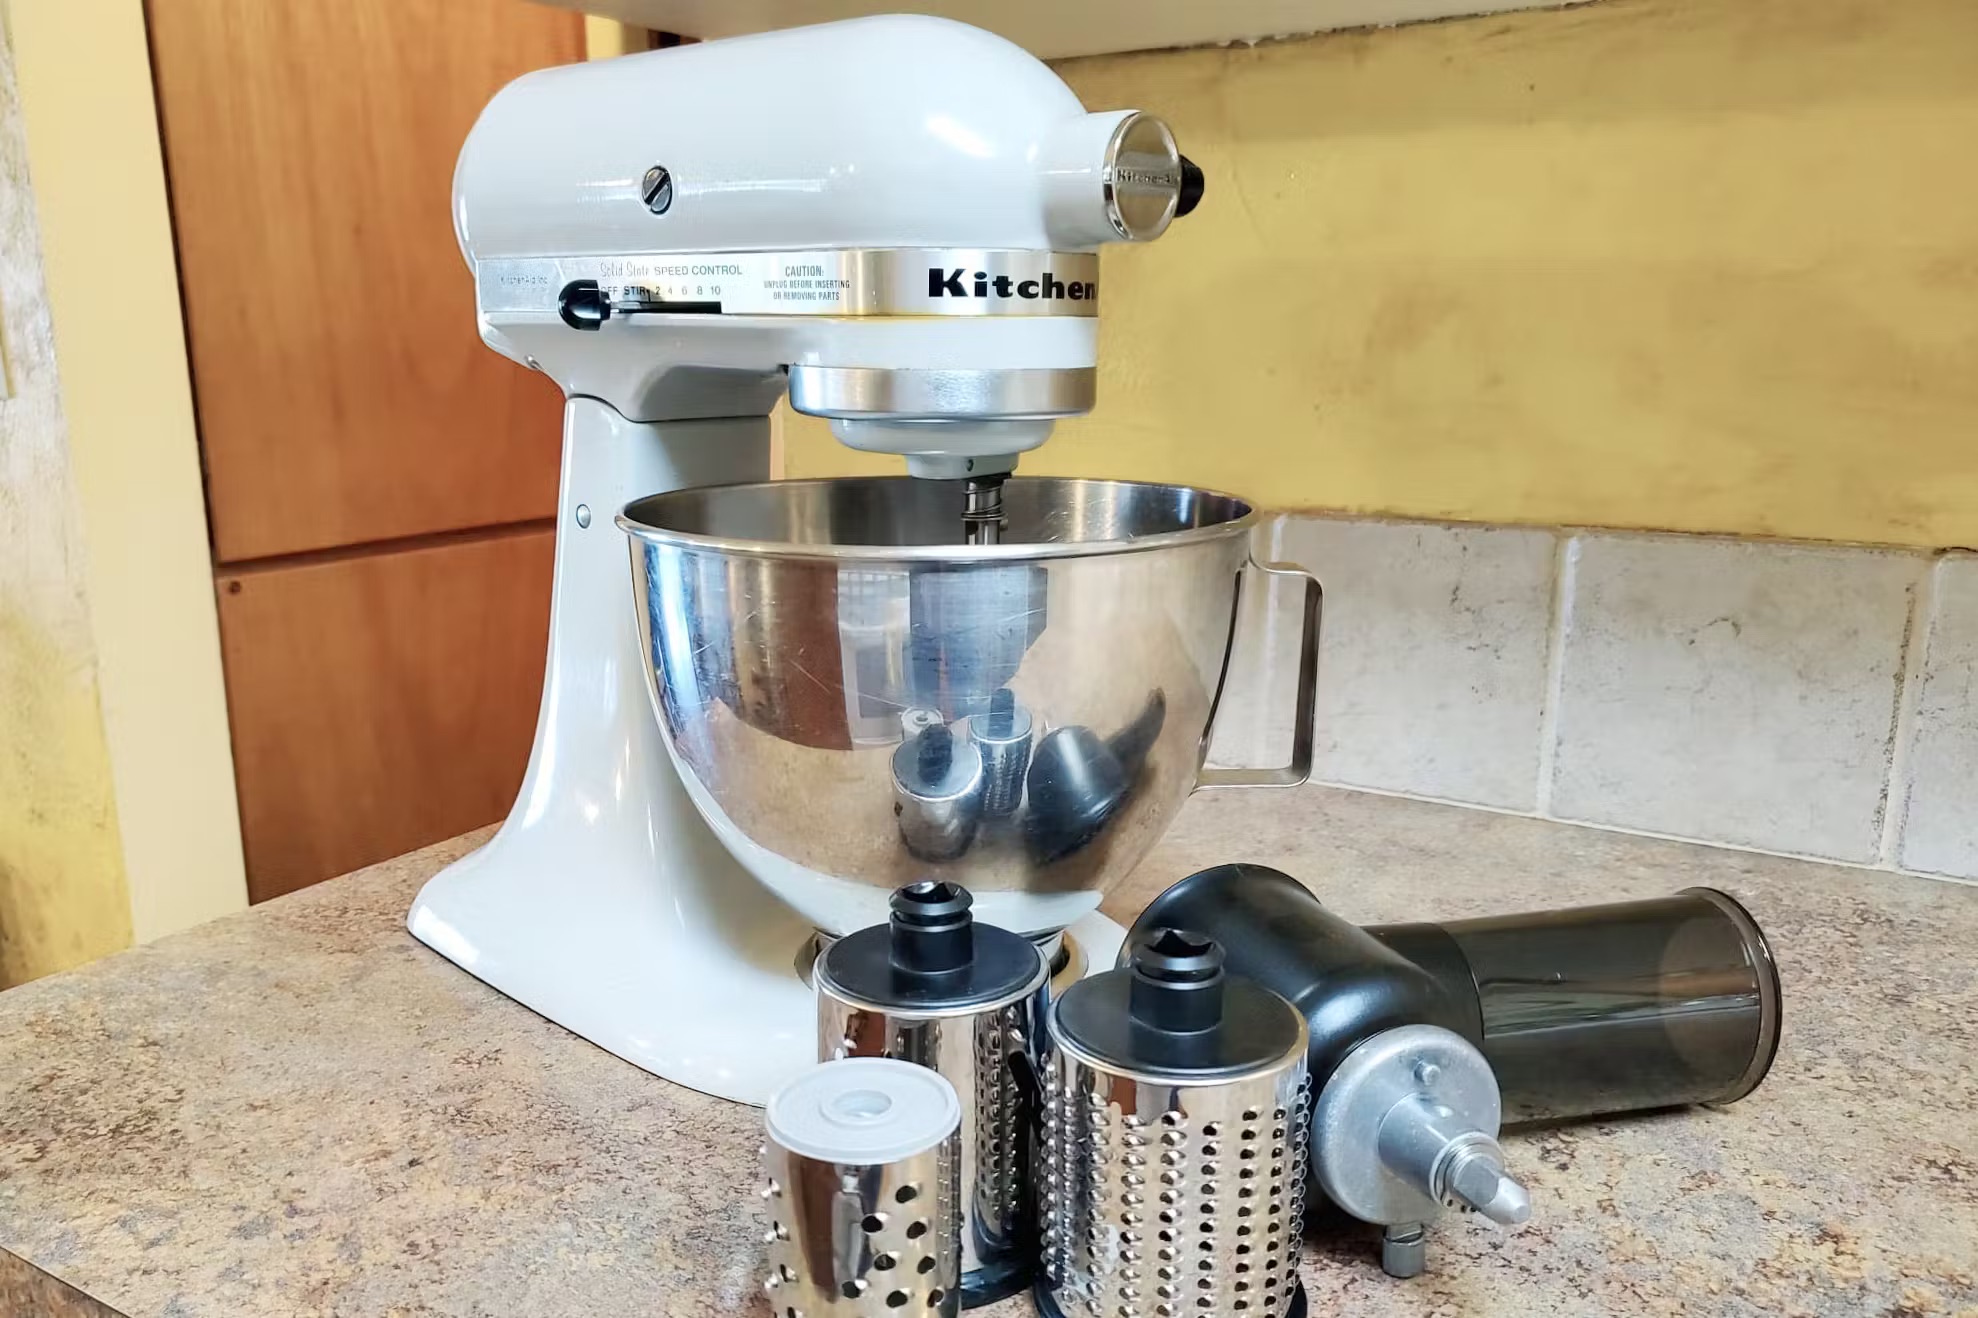 How Can I Tell How Old My Kitchenaid Mixer Is